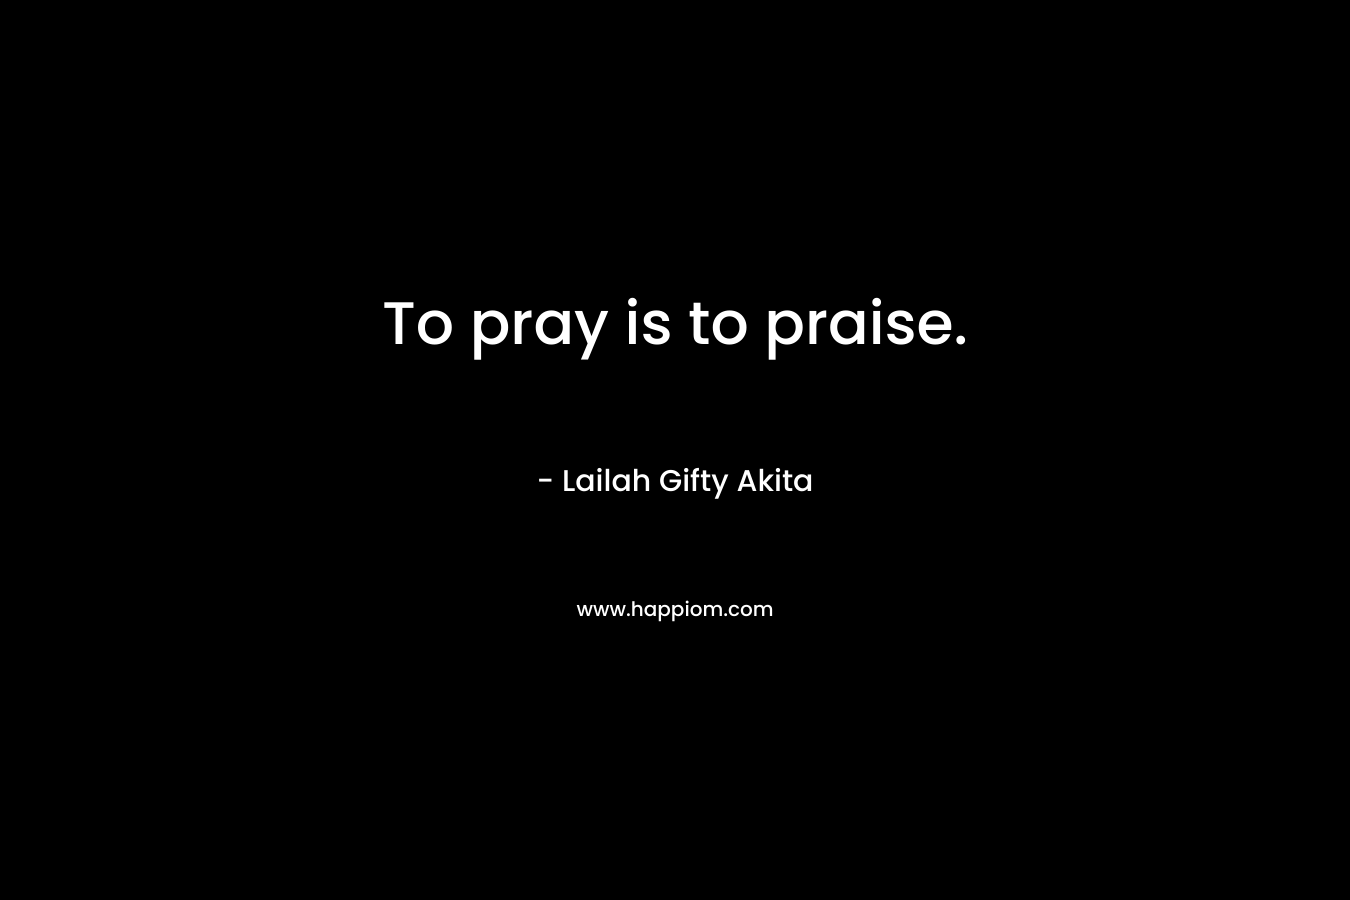 To pray is to praise.